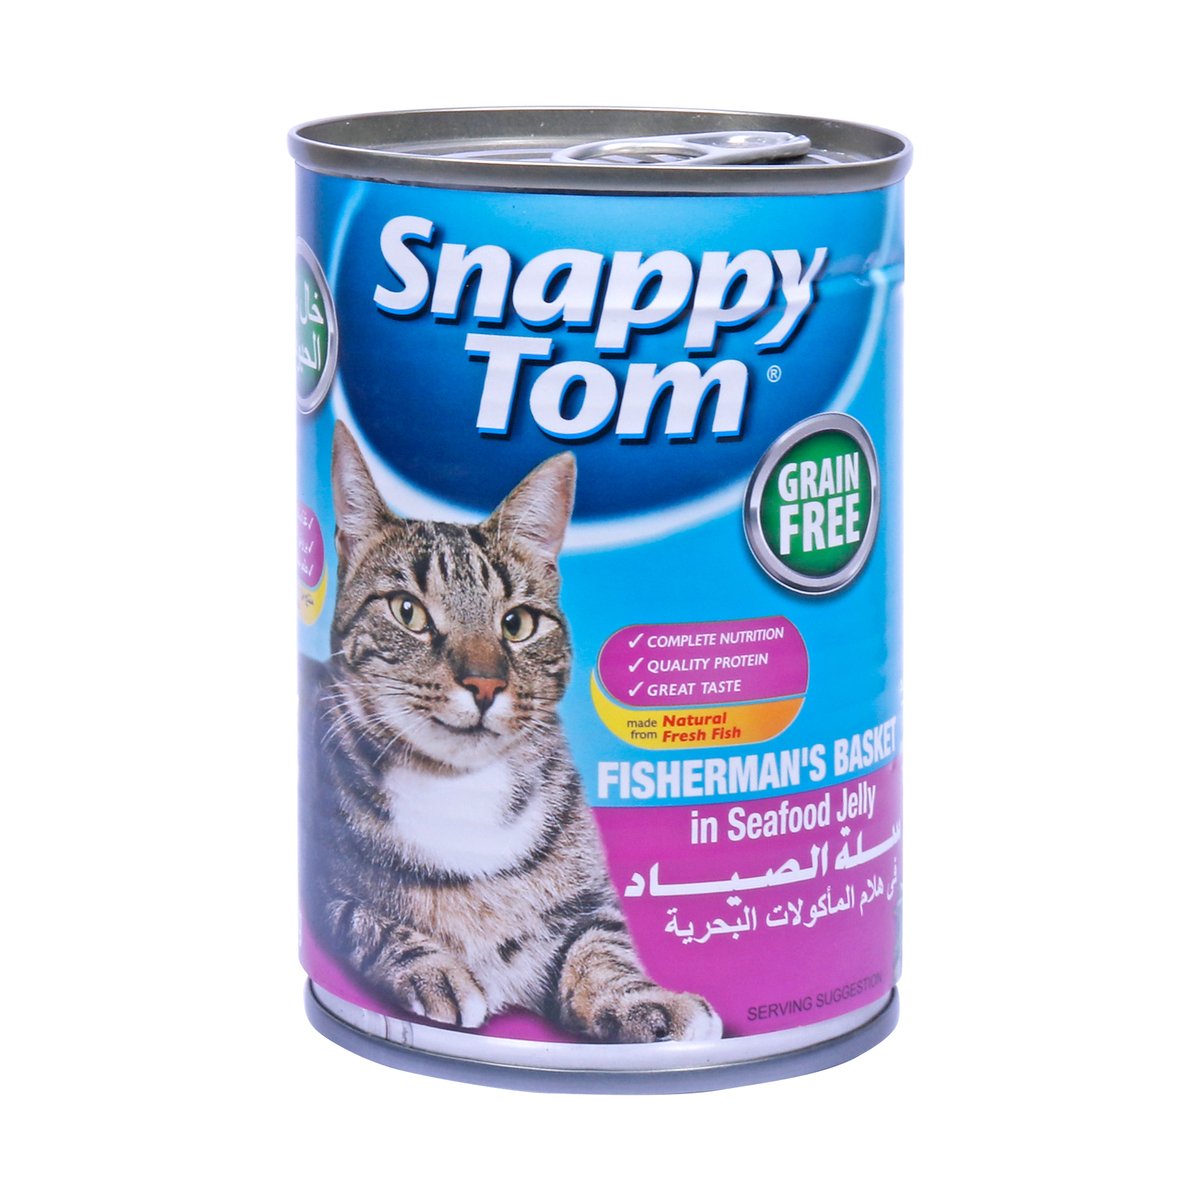 Snappy Tom Fisherman's Basket in Seafood Jelly 400 g